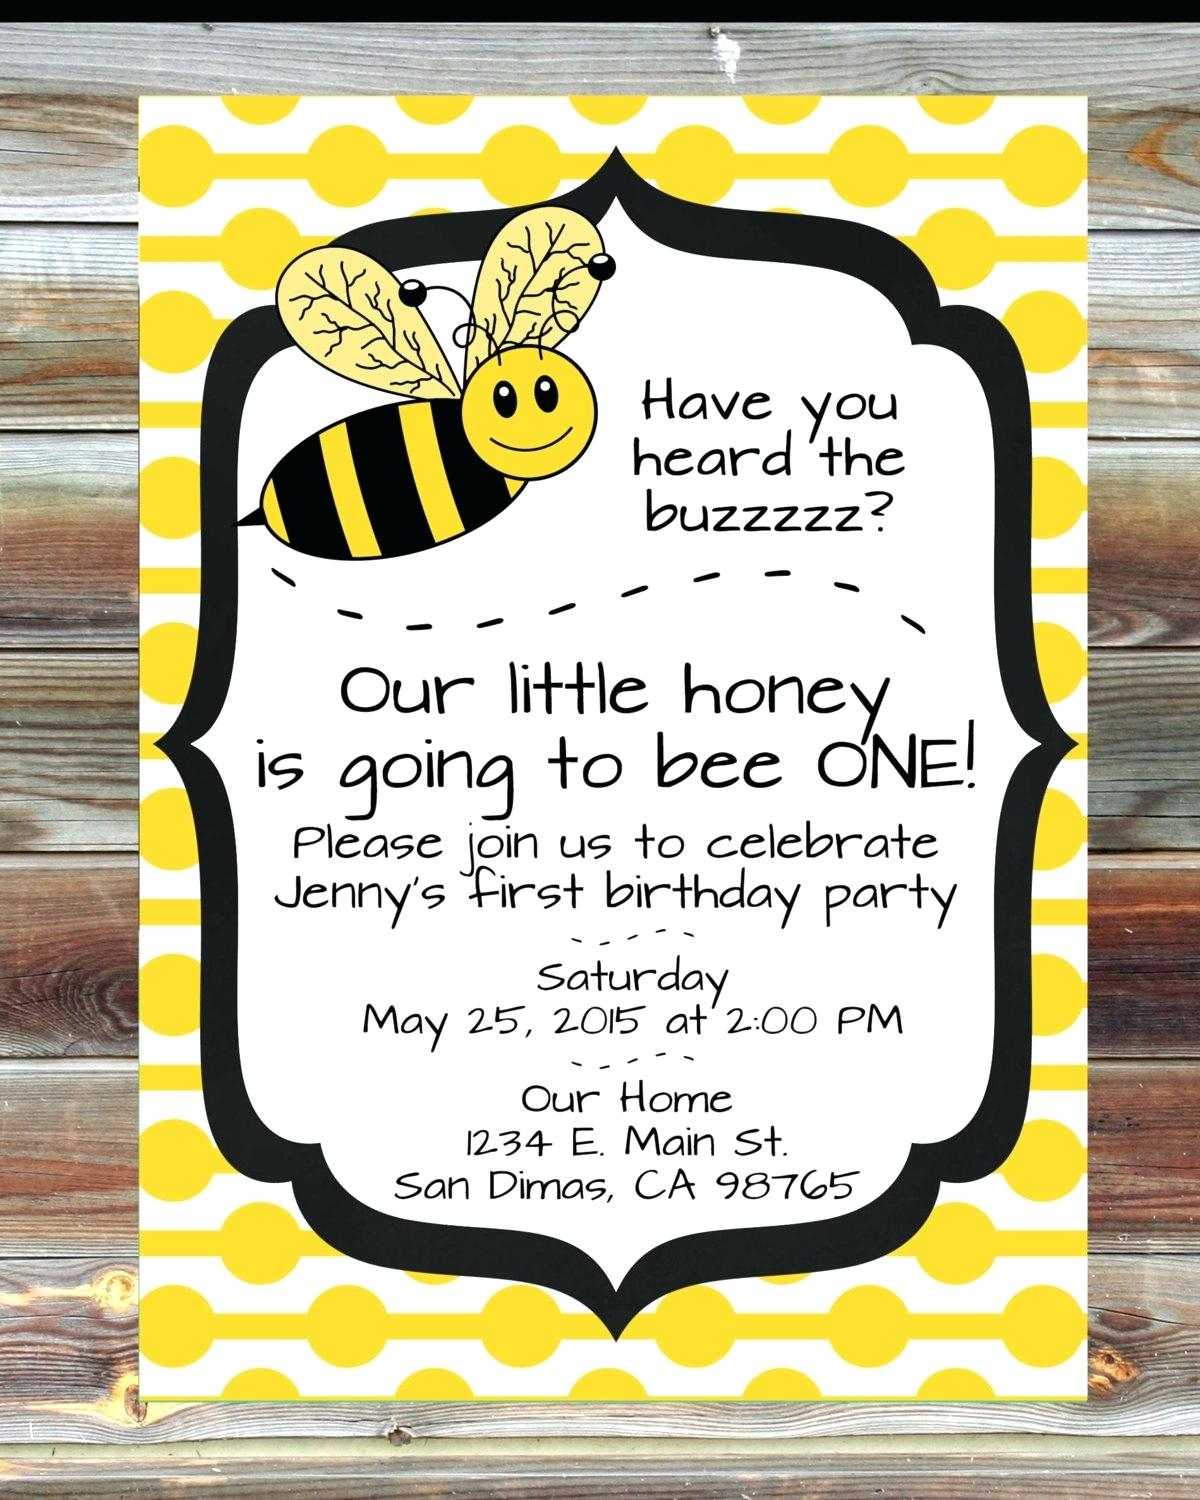 spelling-bee-invitation-template-business-template-ideas